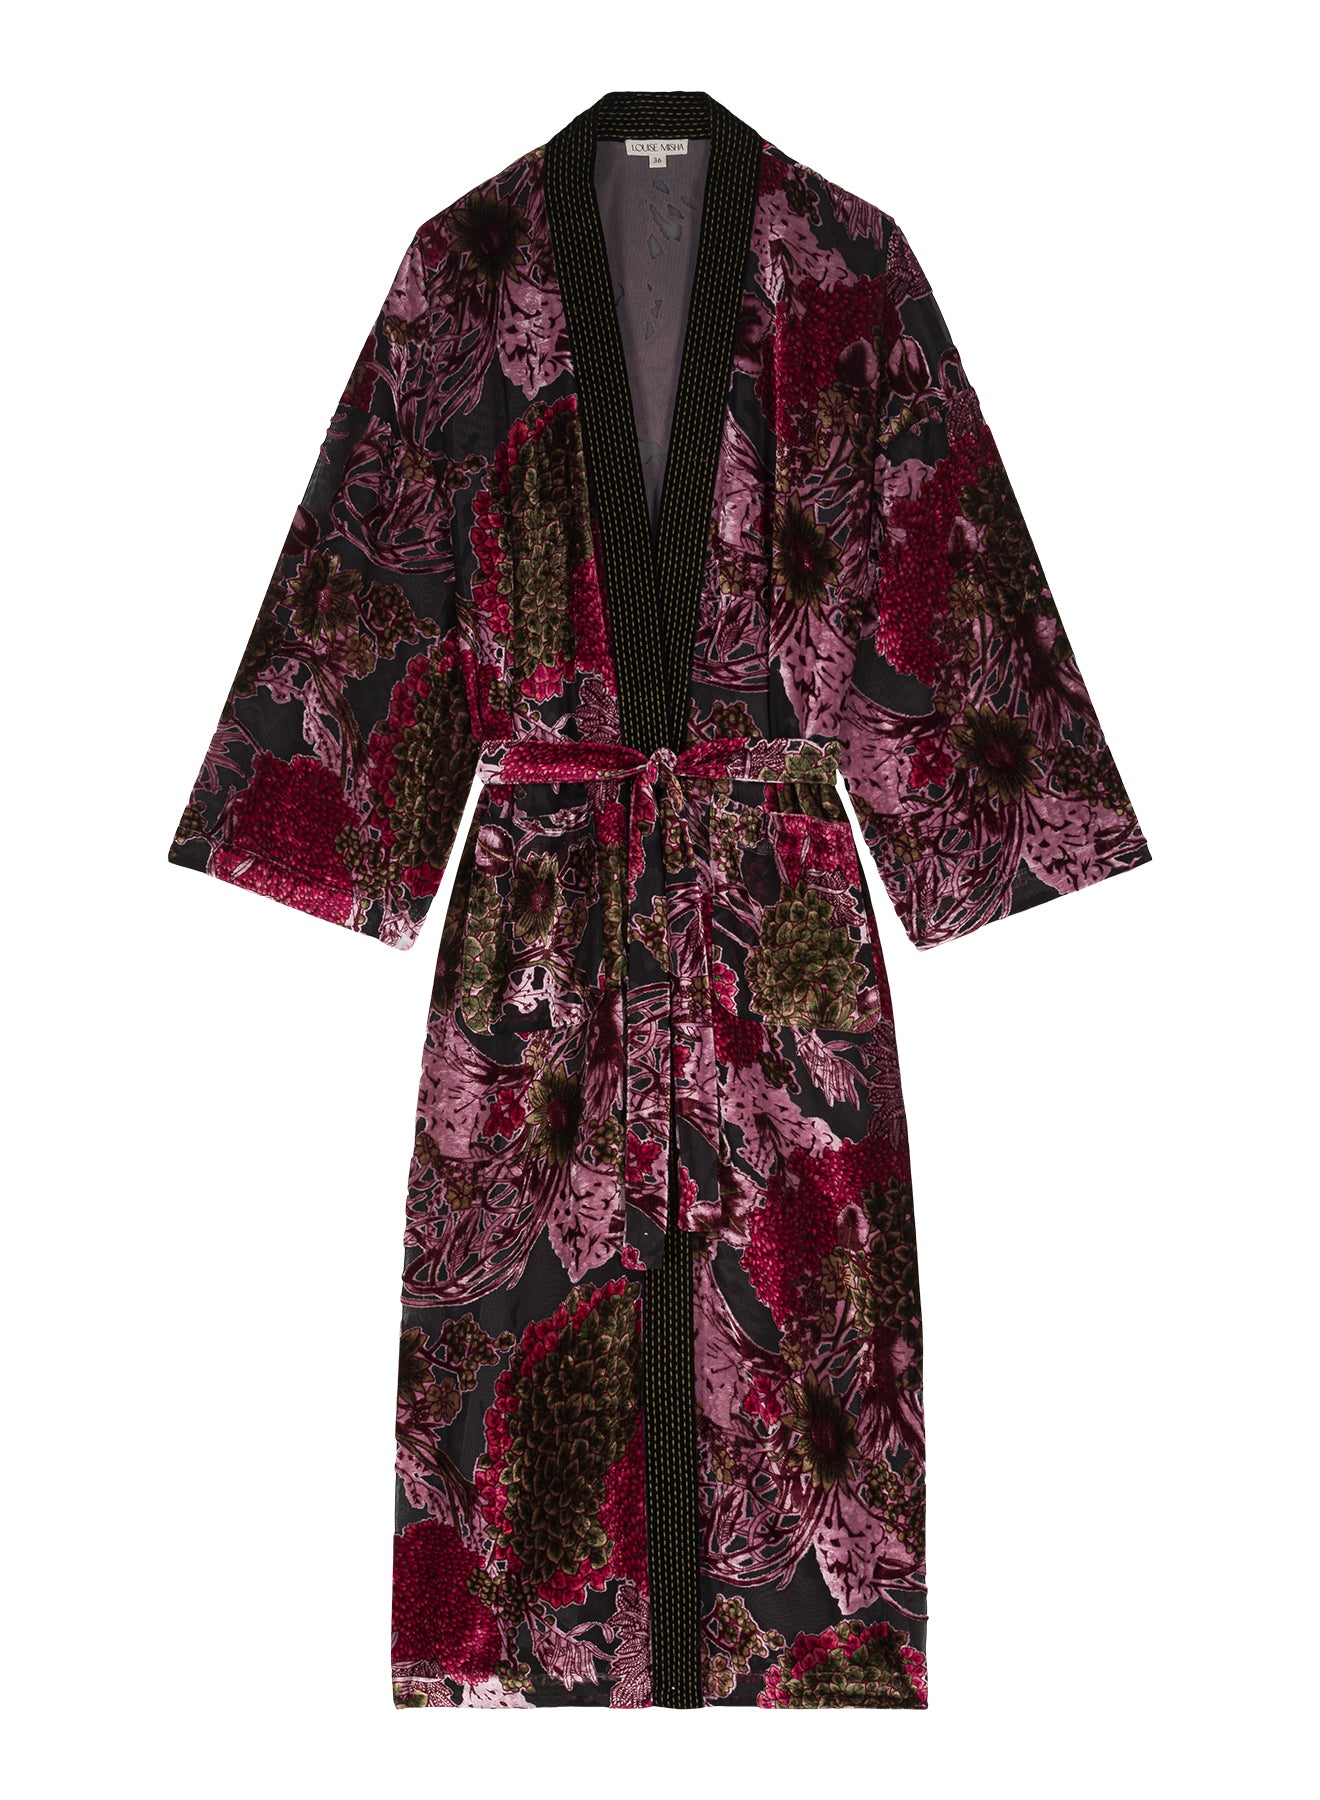 Genuine gem of the bohemian wardrobe, this newly designed robe is born from the designer's bohemian mind. An unpredictable piece, both precious and comfortable, it's just as perfect during the day over jeans as it is in the evening thanks to its very delicate burnout velvet.